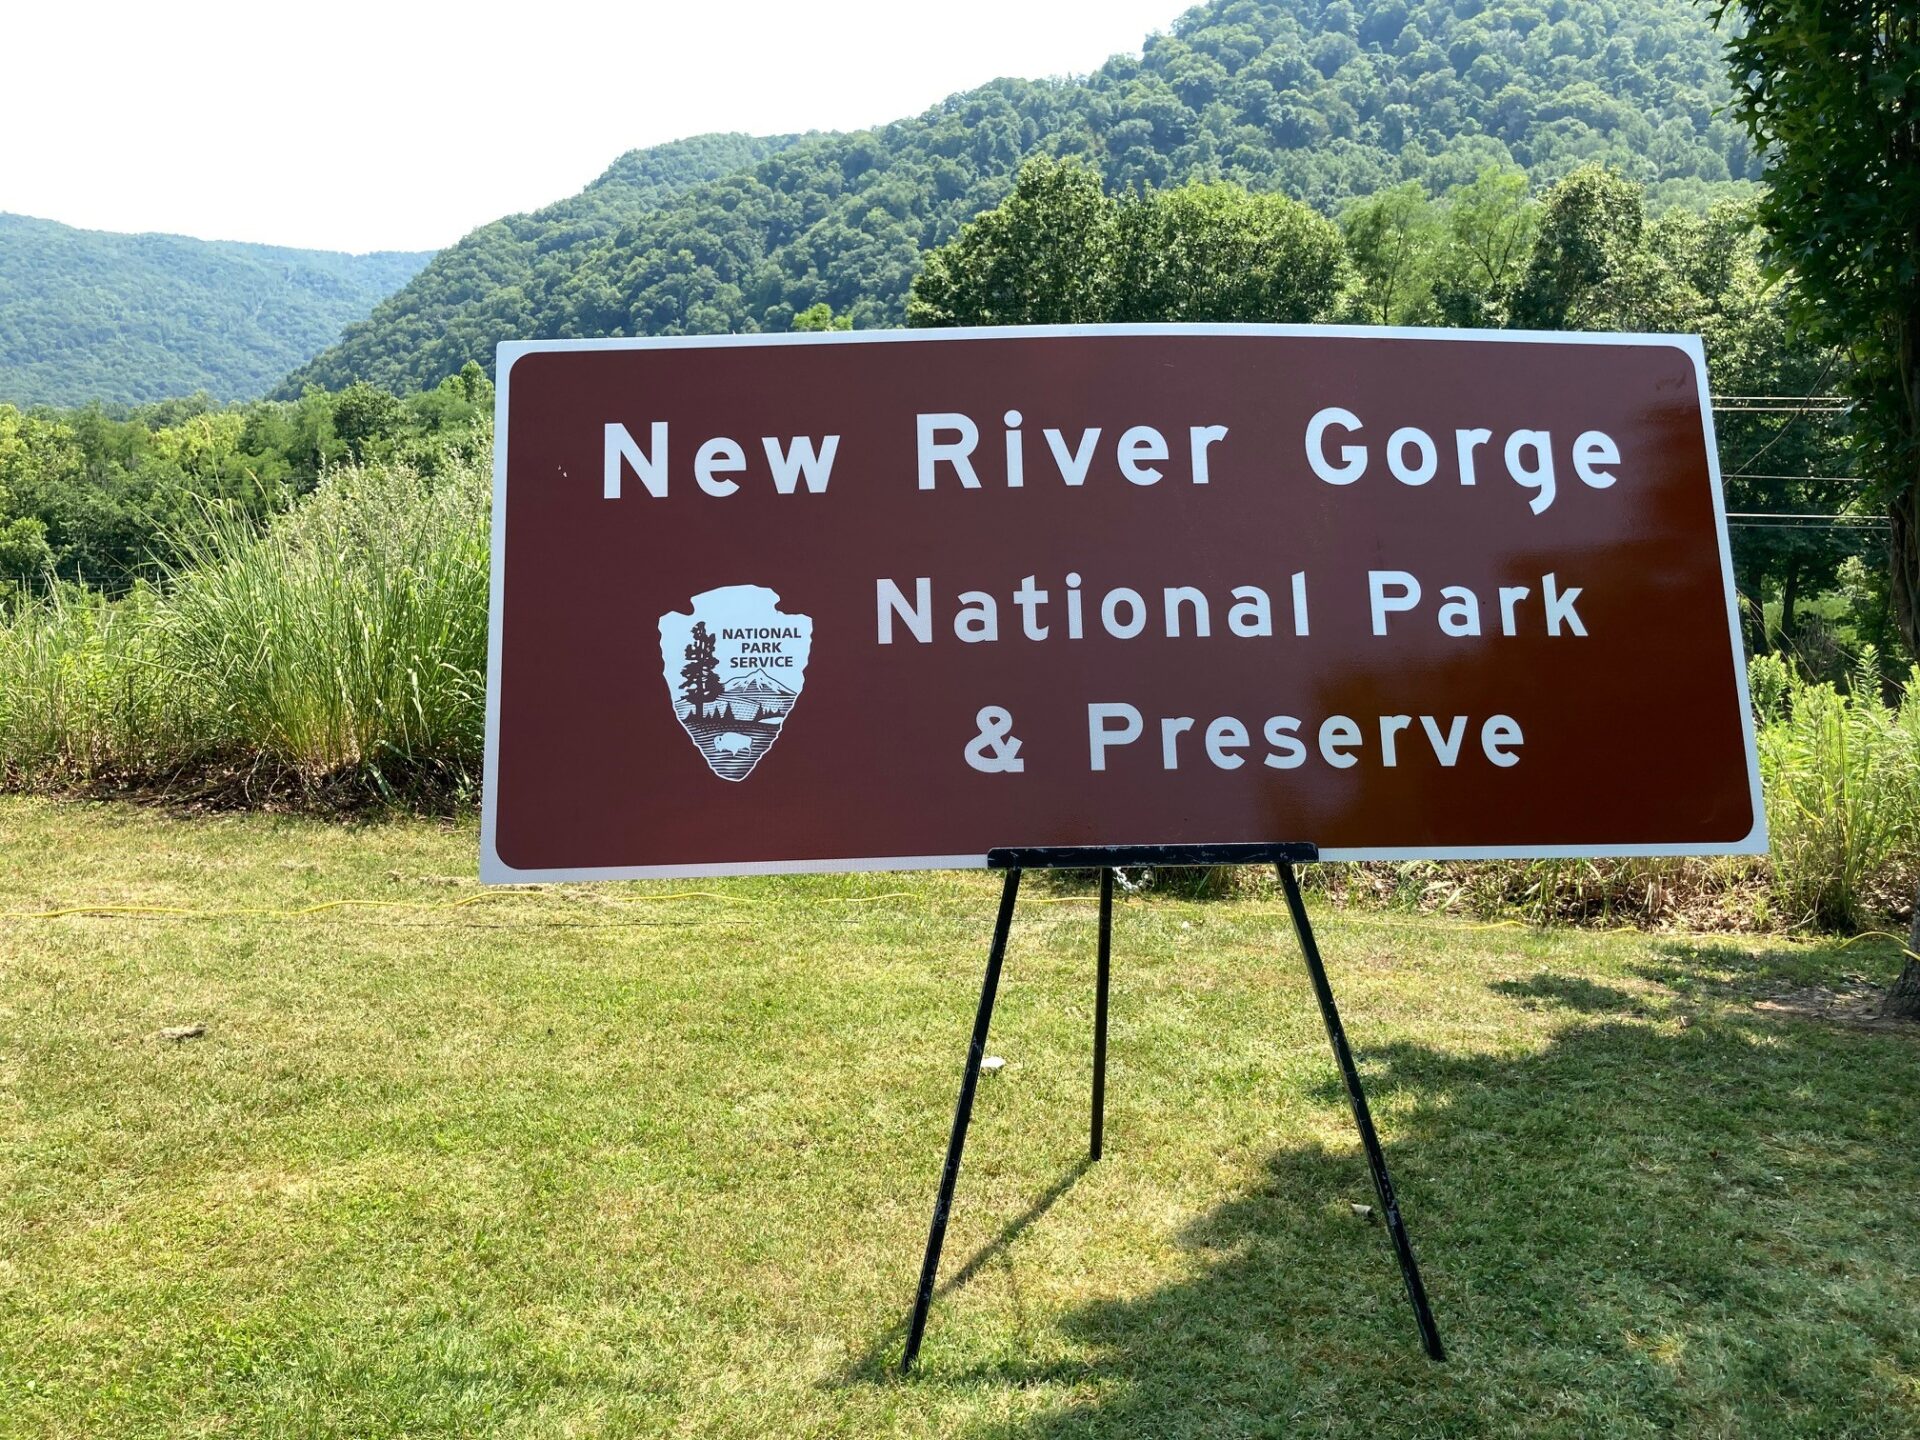 New River Gorge Drew A Record 1.7 Million Visitors Last Year